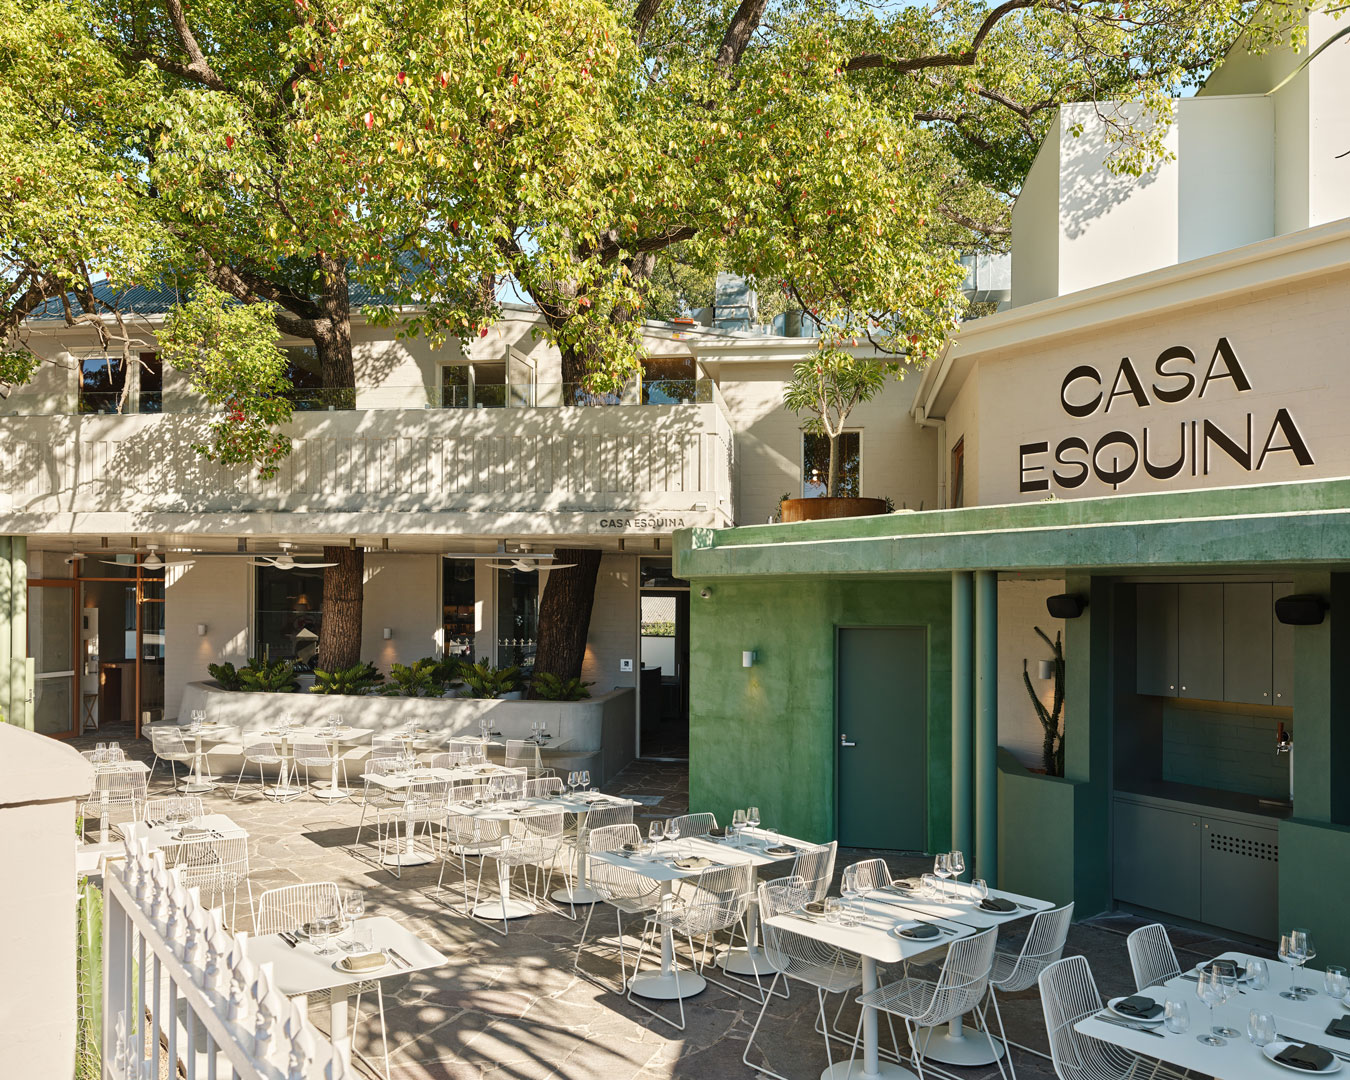 The leafy courtyard at Casa Esquina, a new restaurant in Sydney